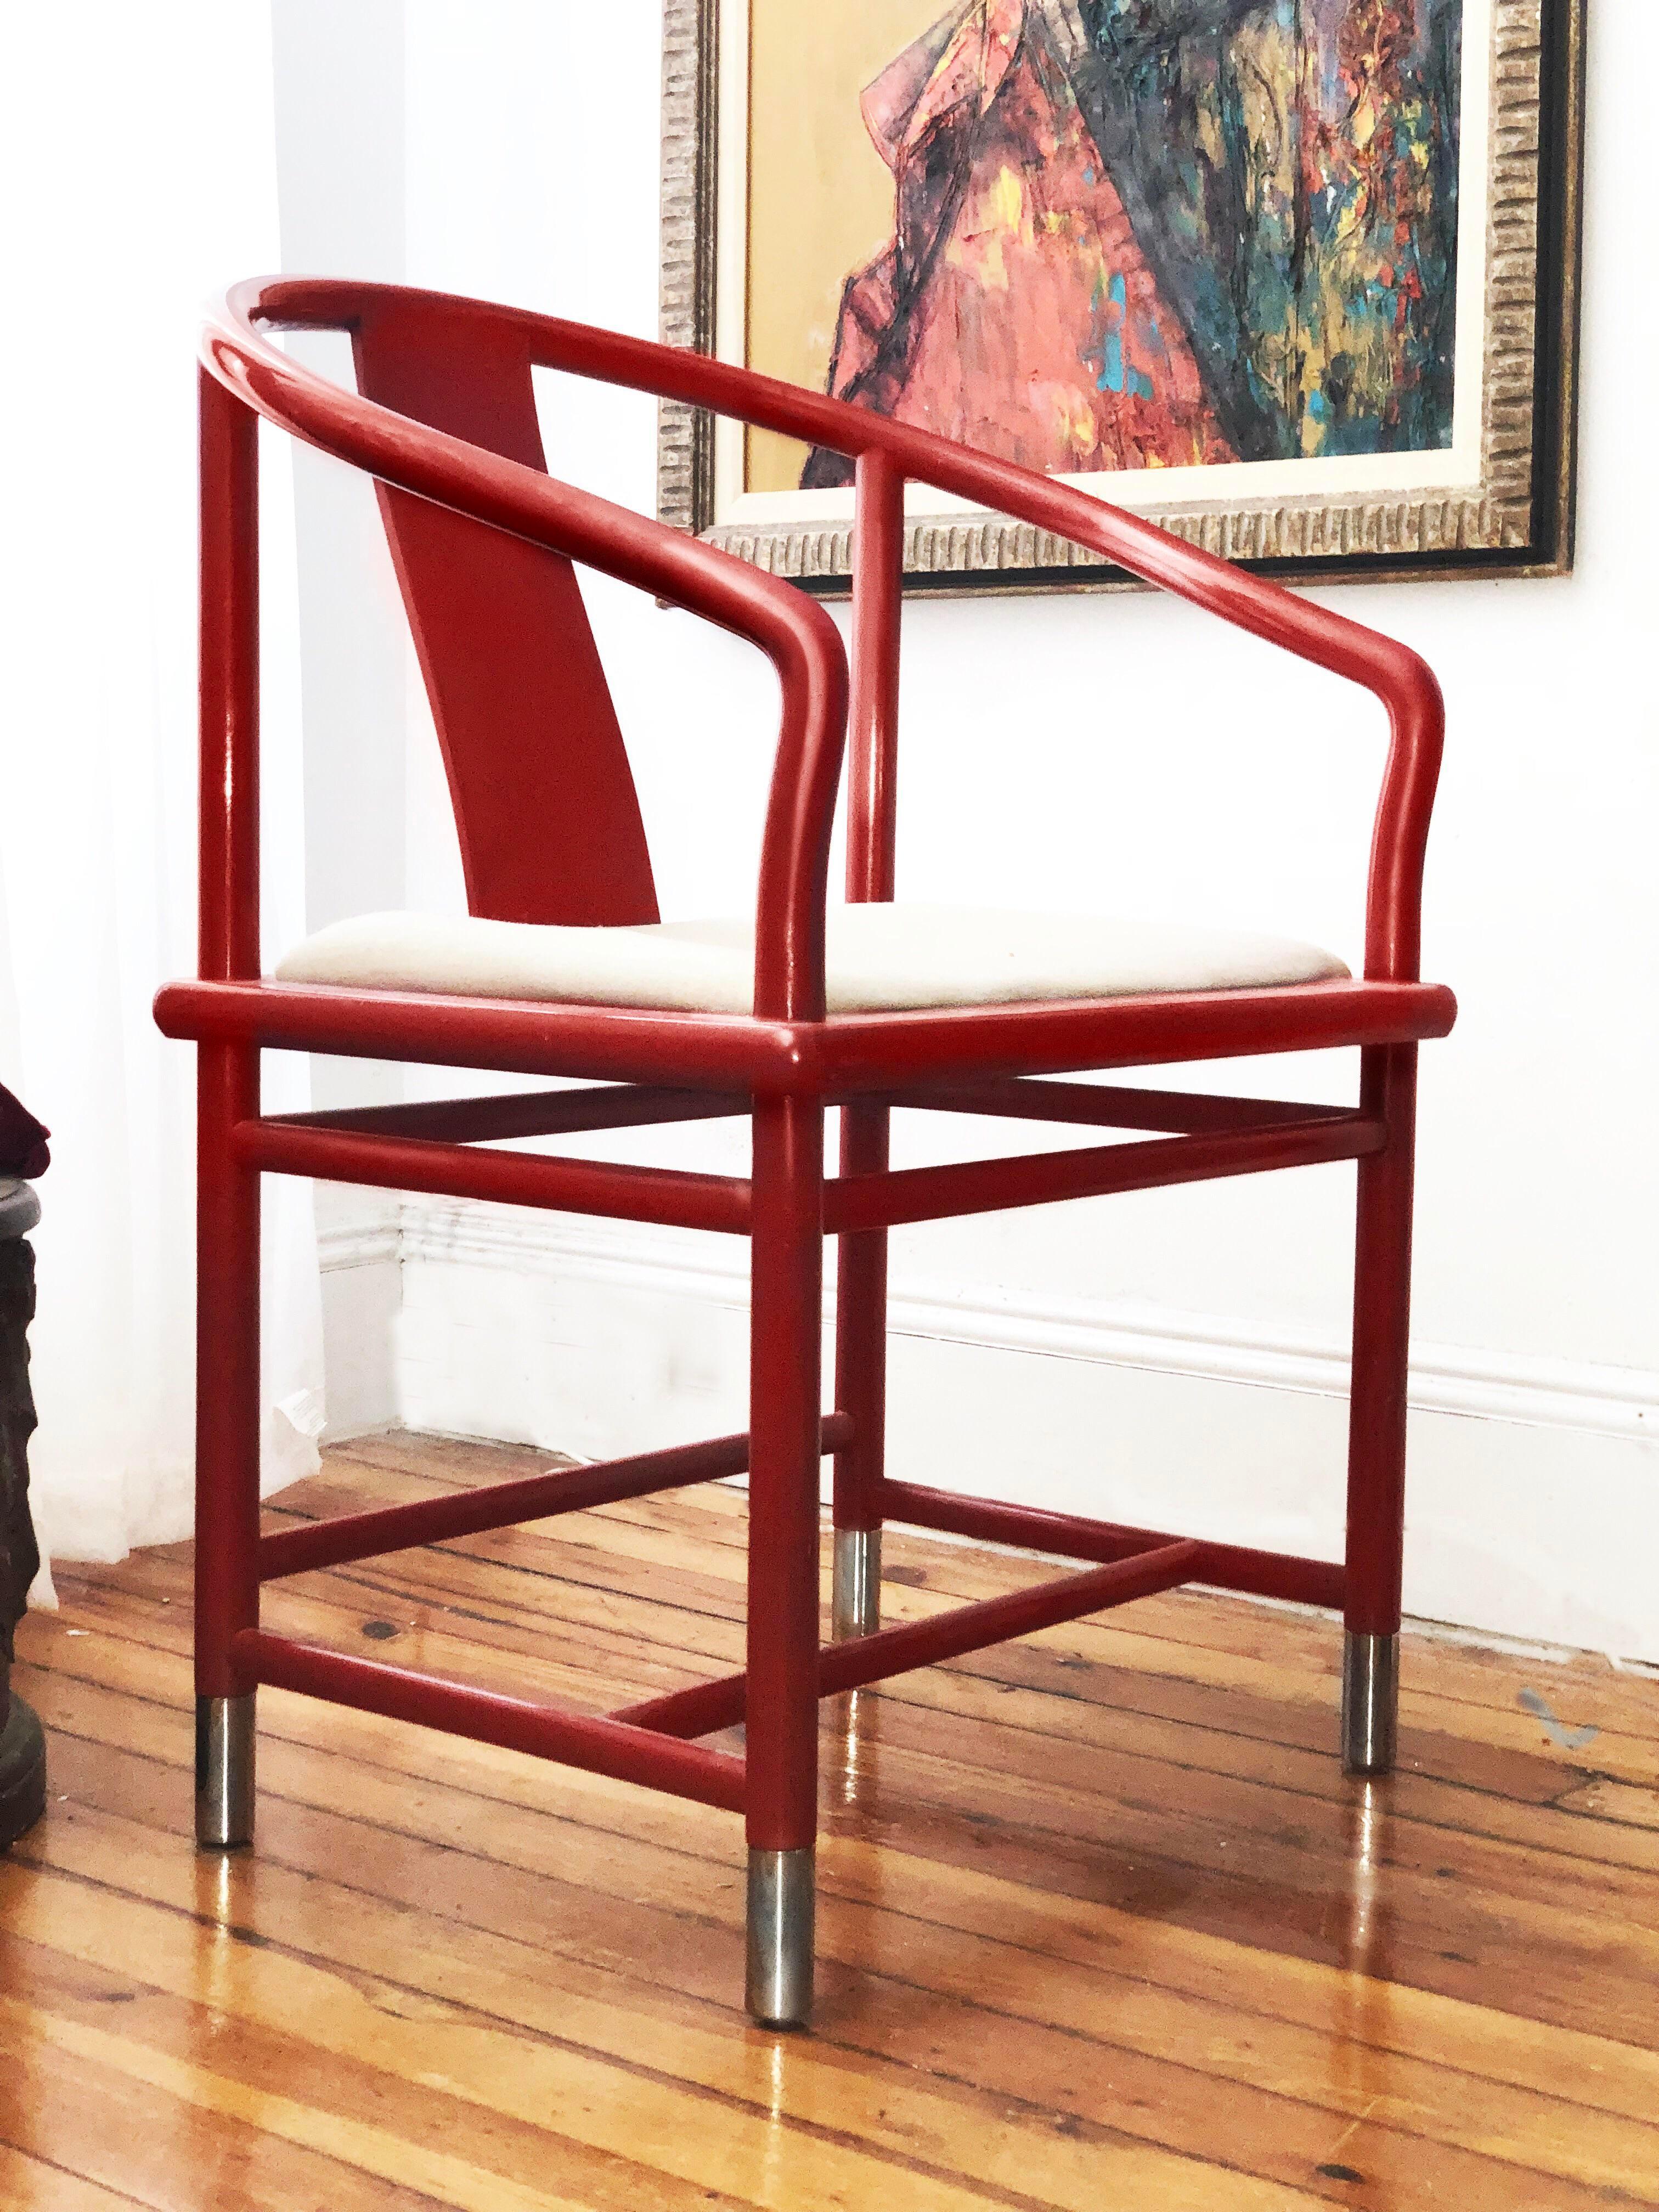 Gorgeous Ming-inspired armchairby Brueton. lipstick, red sinuous line that meet the ground with a chromed steel cuff on each the foot. Show stopper.. I would recommend reupholstering. Current linen type of fabric is in ok condition, shows some wear